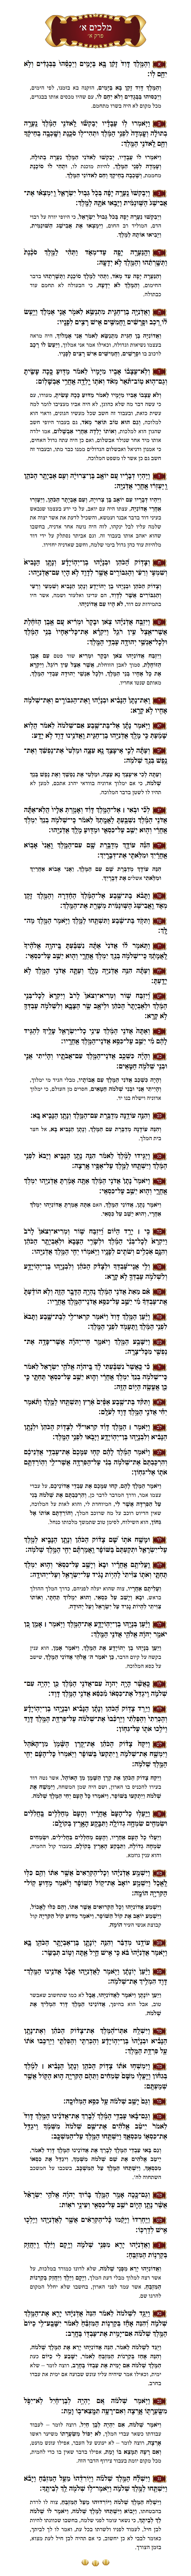 Sefer Melachim 1 Chapter 1 with commentary